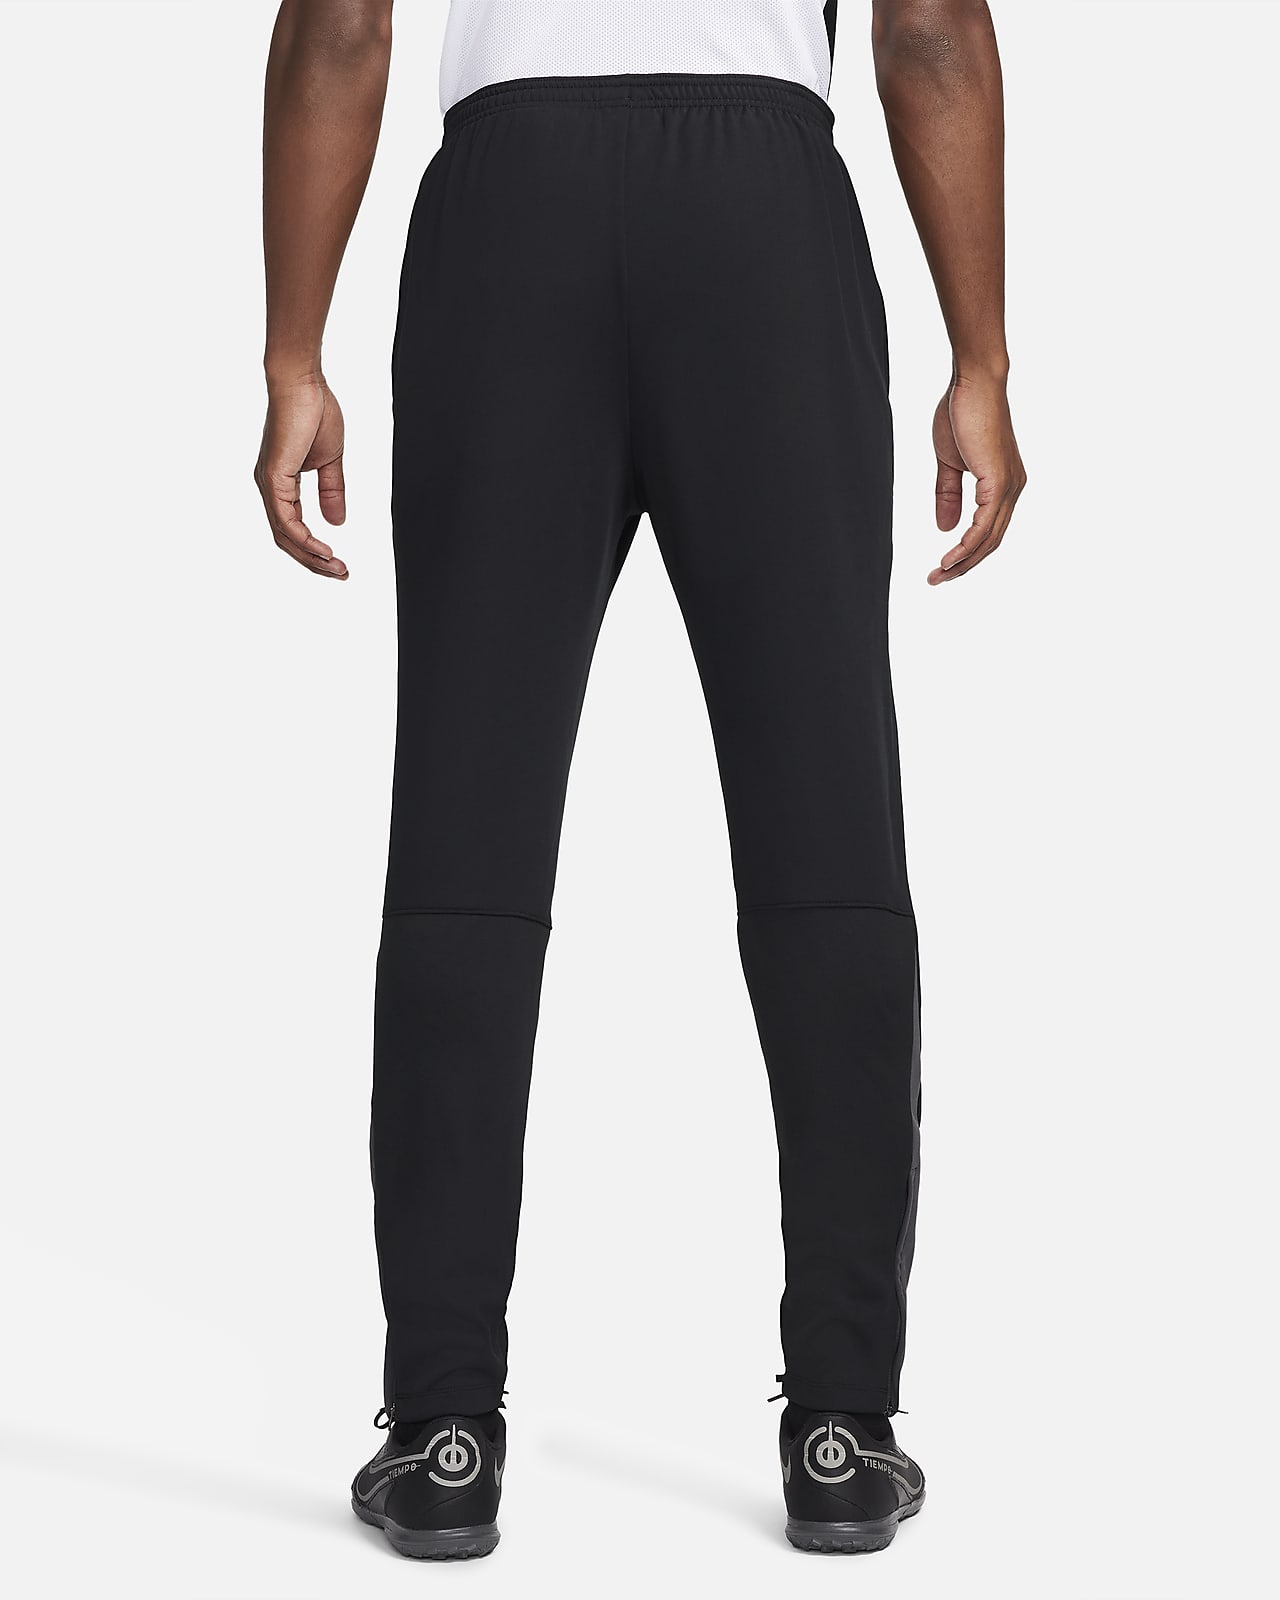 All In Motion Winter Athletic Pants for Women